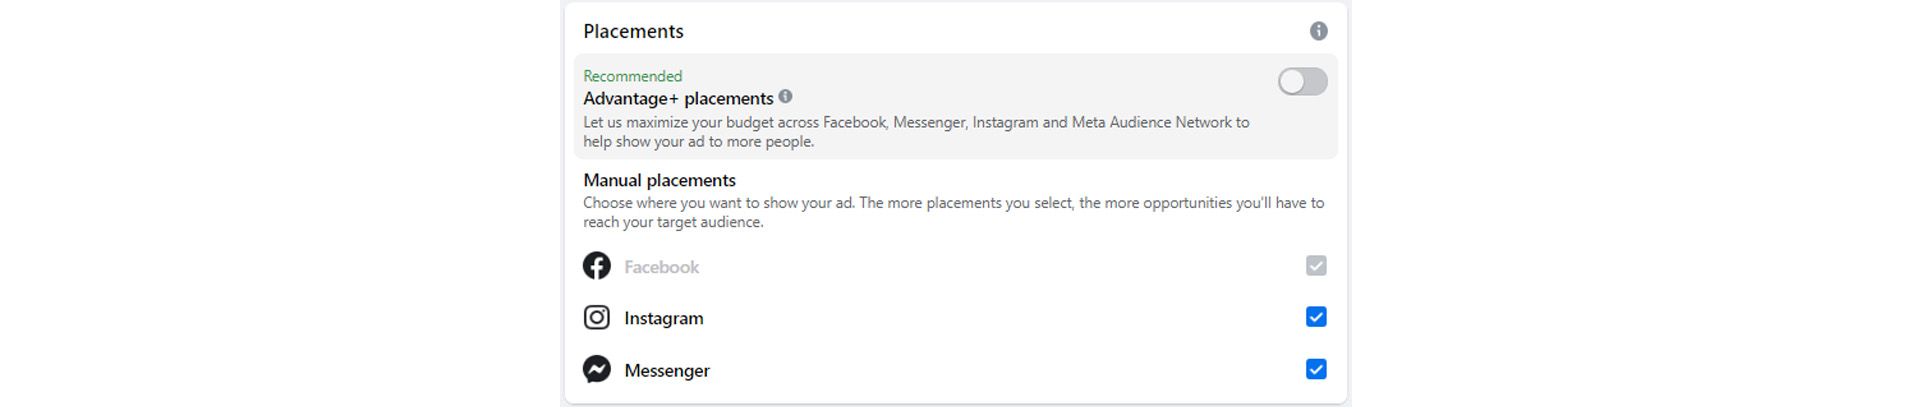 Facebook post boosting placements